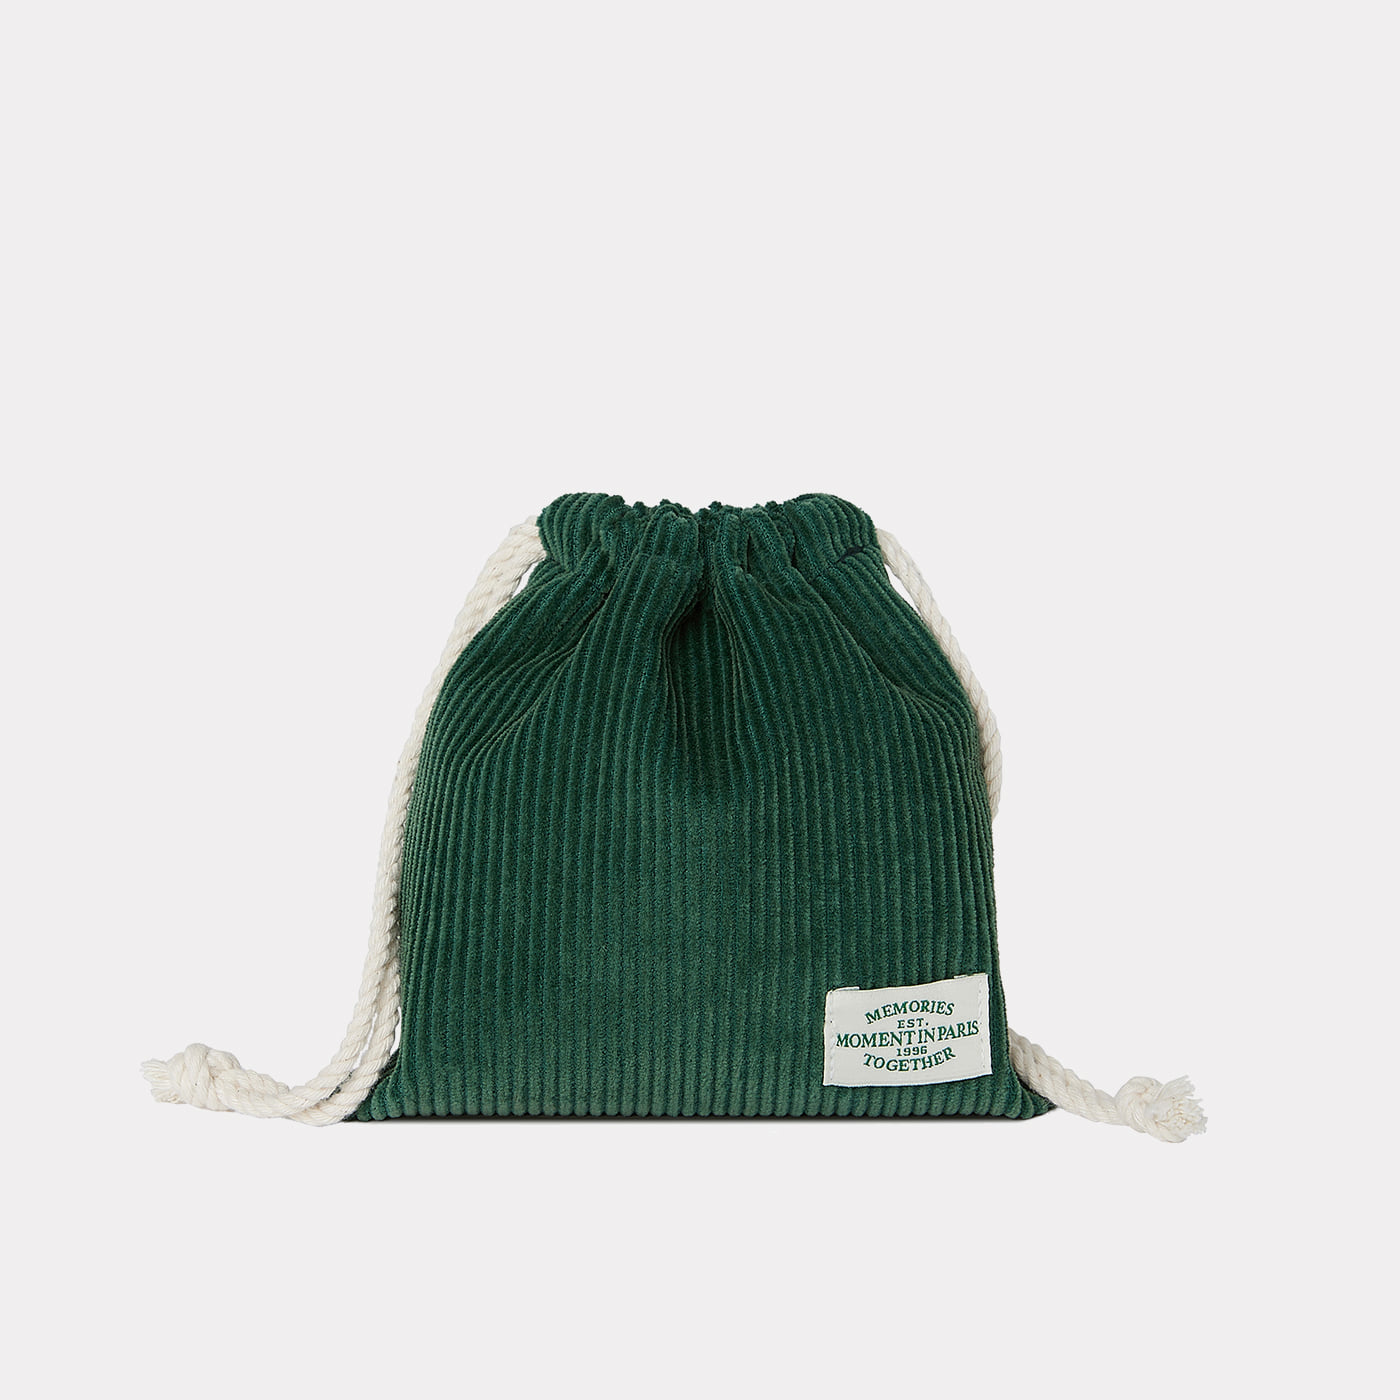 paris in moment corduroy green string pouch